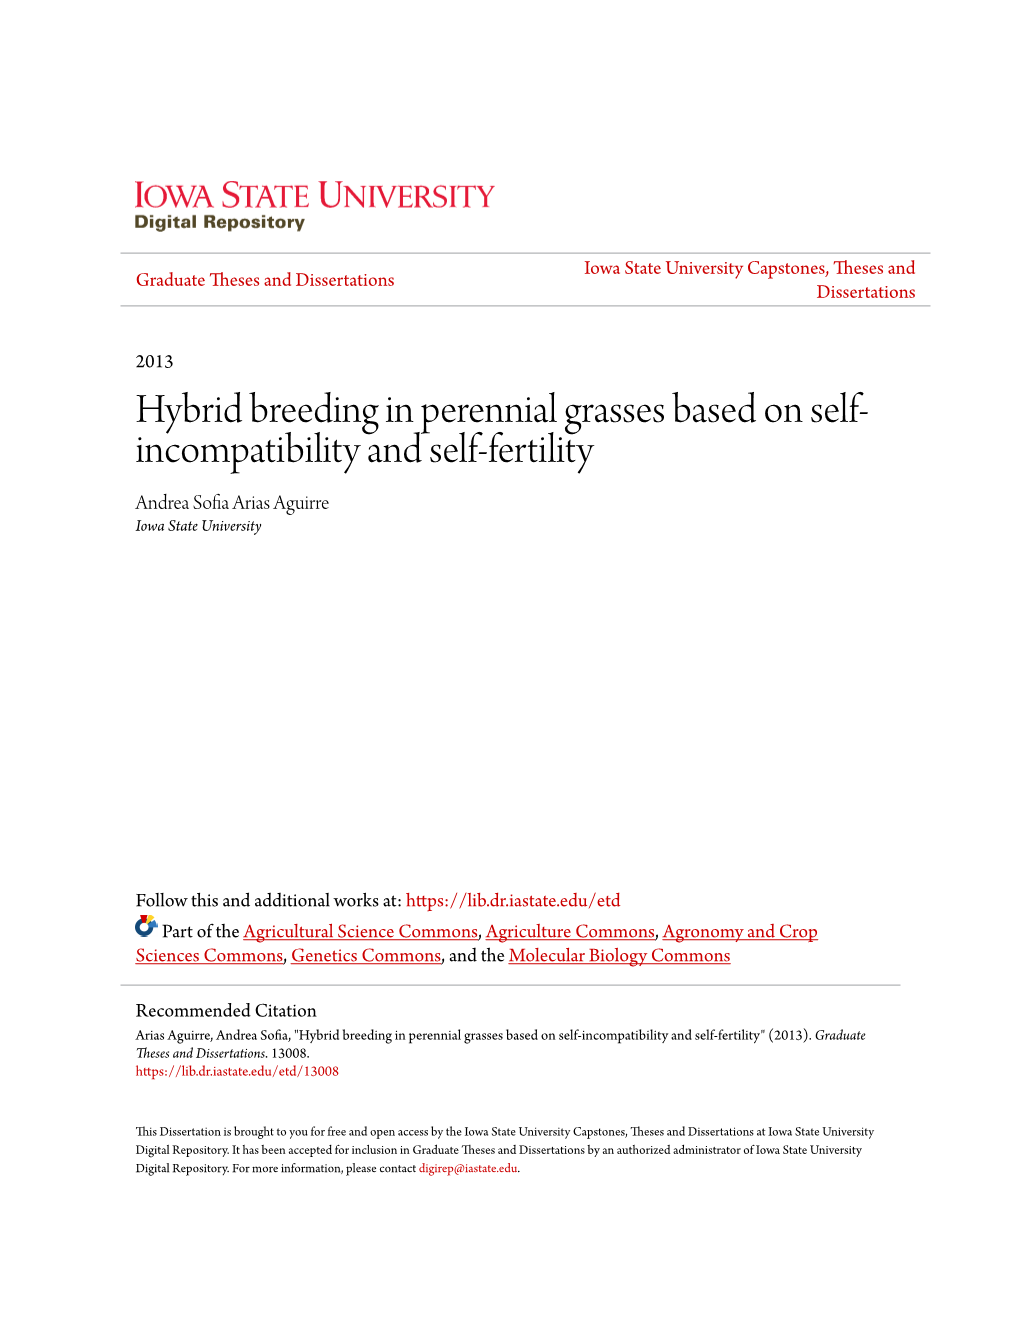 Hybrid Breeding in Perennial Grasses Based on Self-Incompatibility and Self-Fertility" (2013)